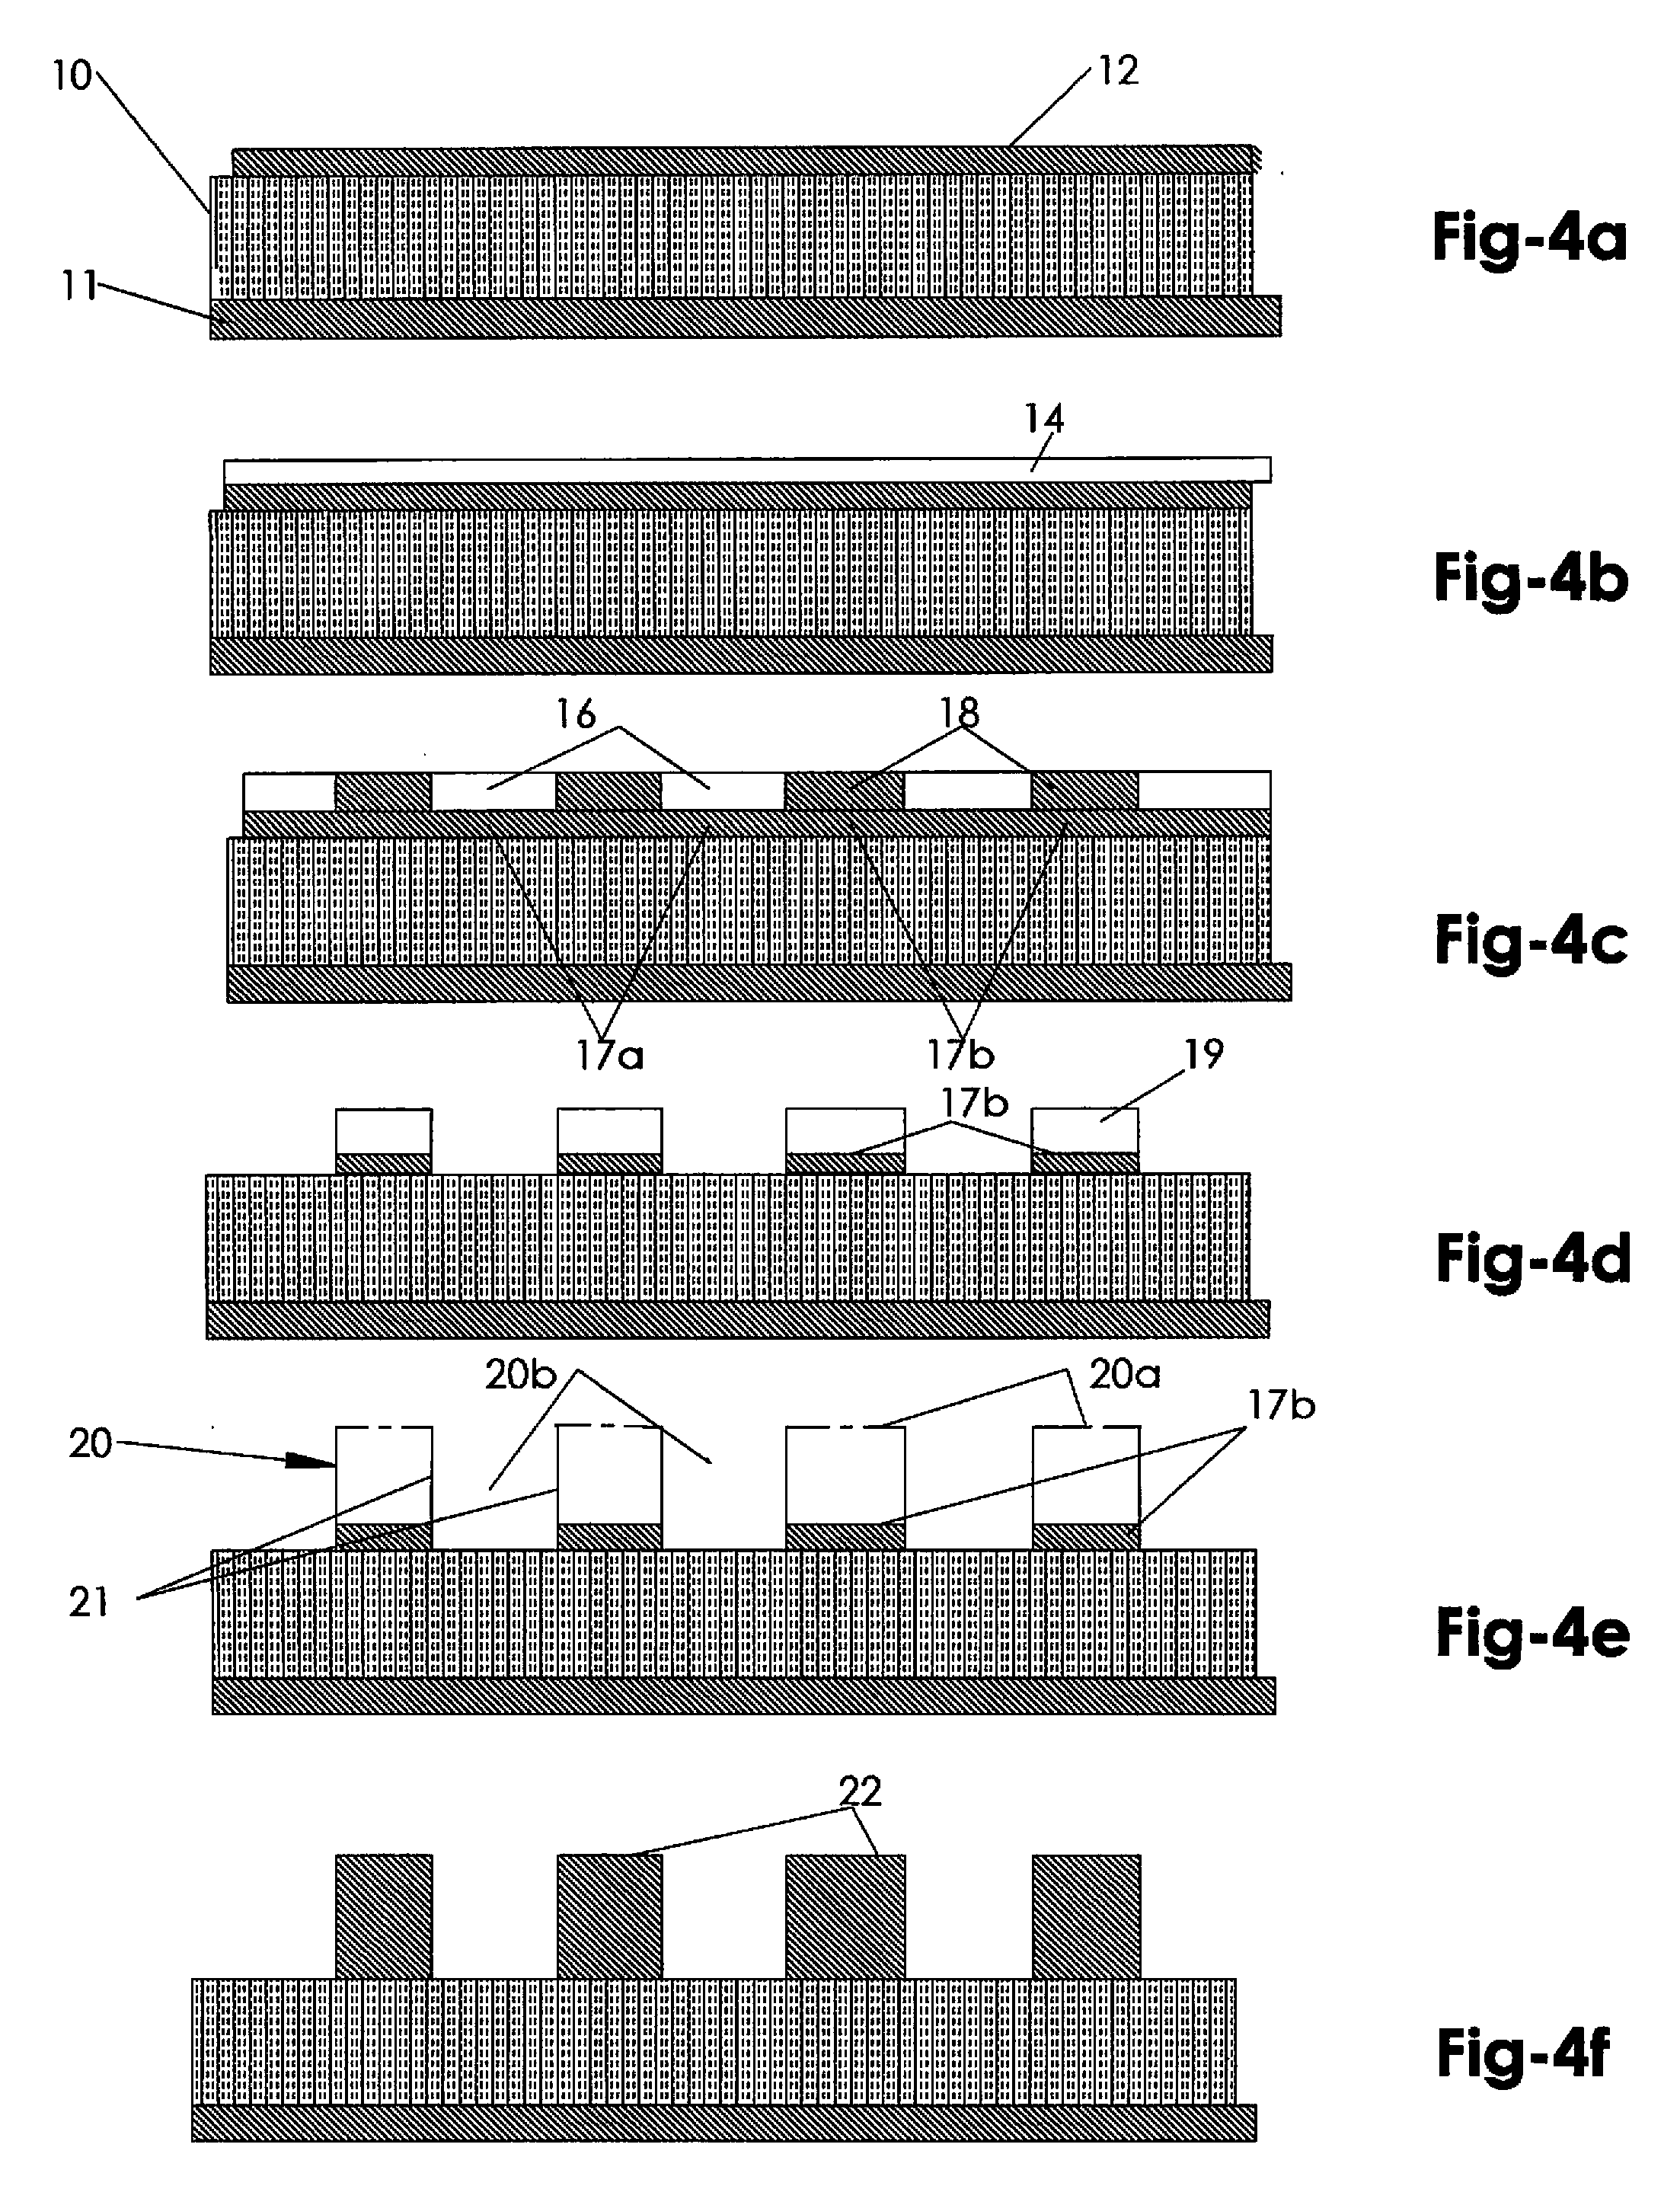 Process for Making a Multilayer Circuit Device Having Electrically Isolated Tightly Spaced Electrical Current Carrying Traces